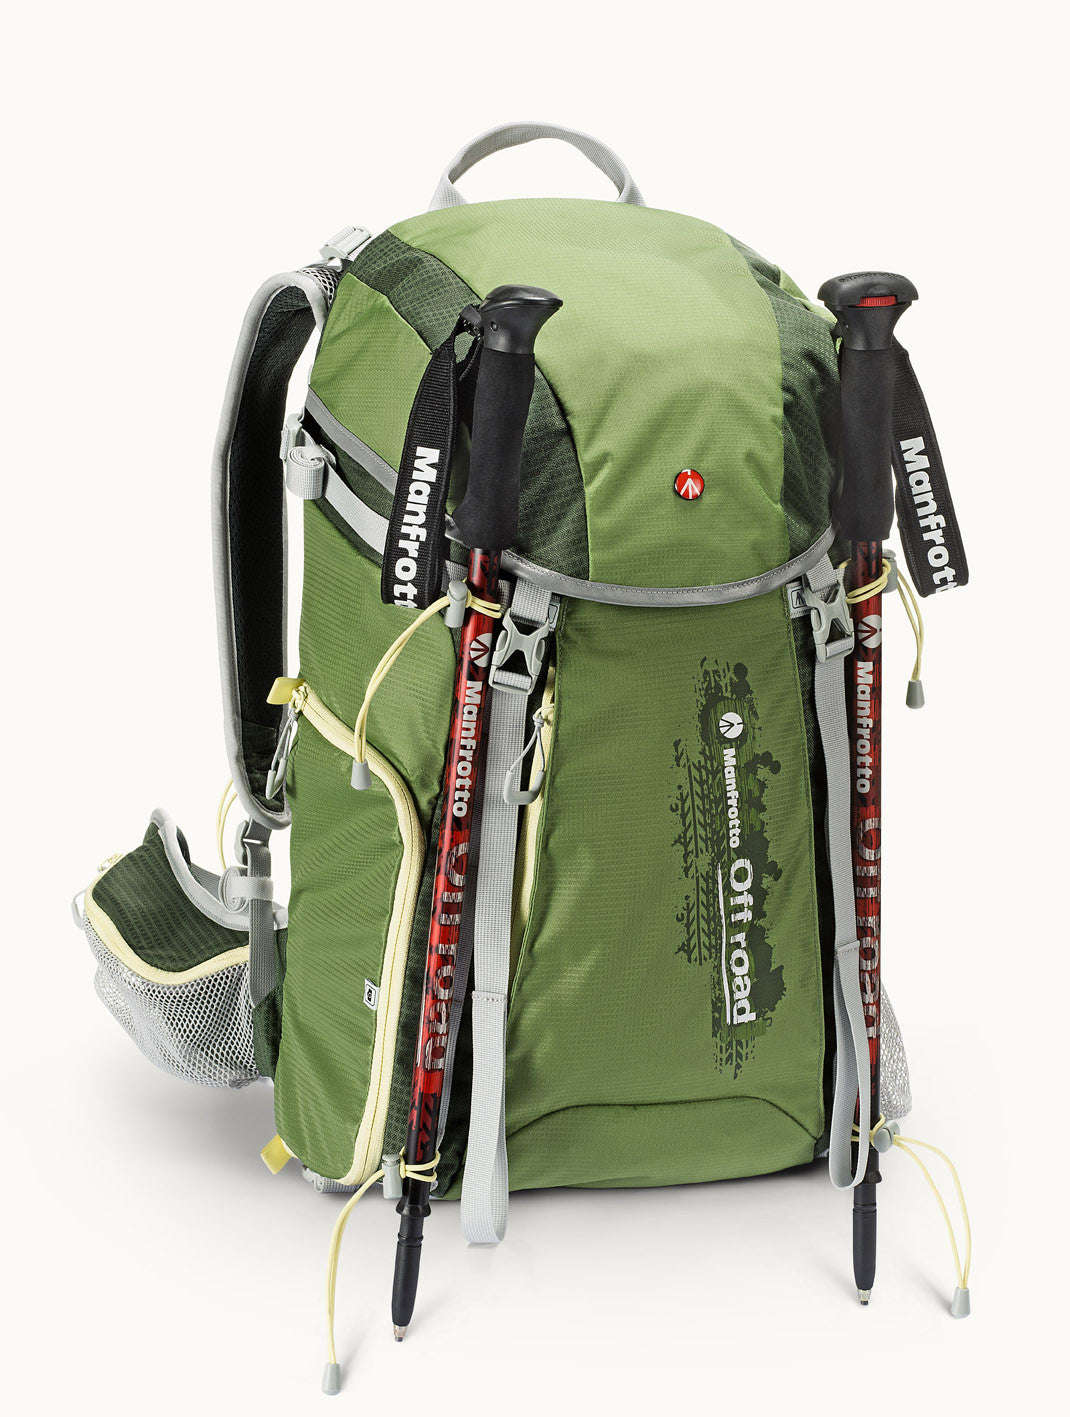 Manfrotto Off Road Hiking Backpack Green, discontinued, Manfrotto - Pictureline  - 2